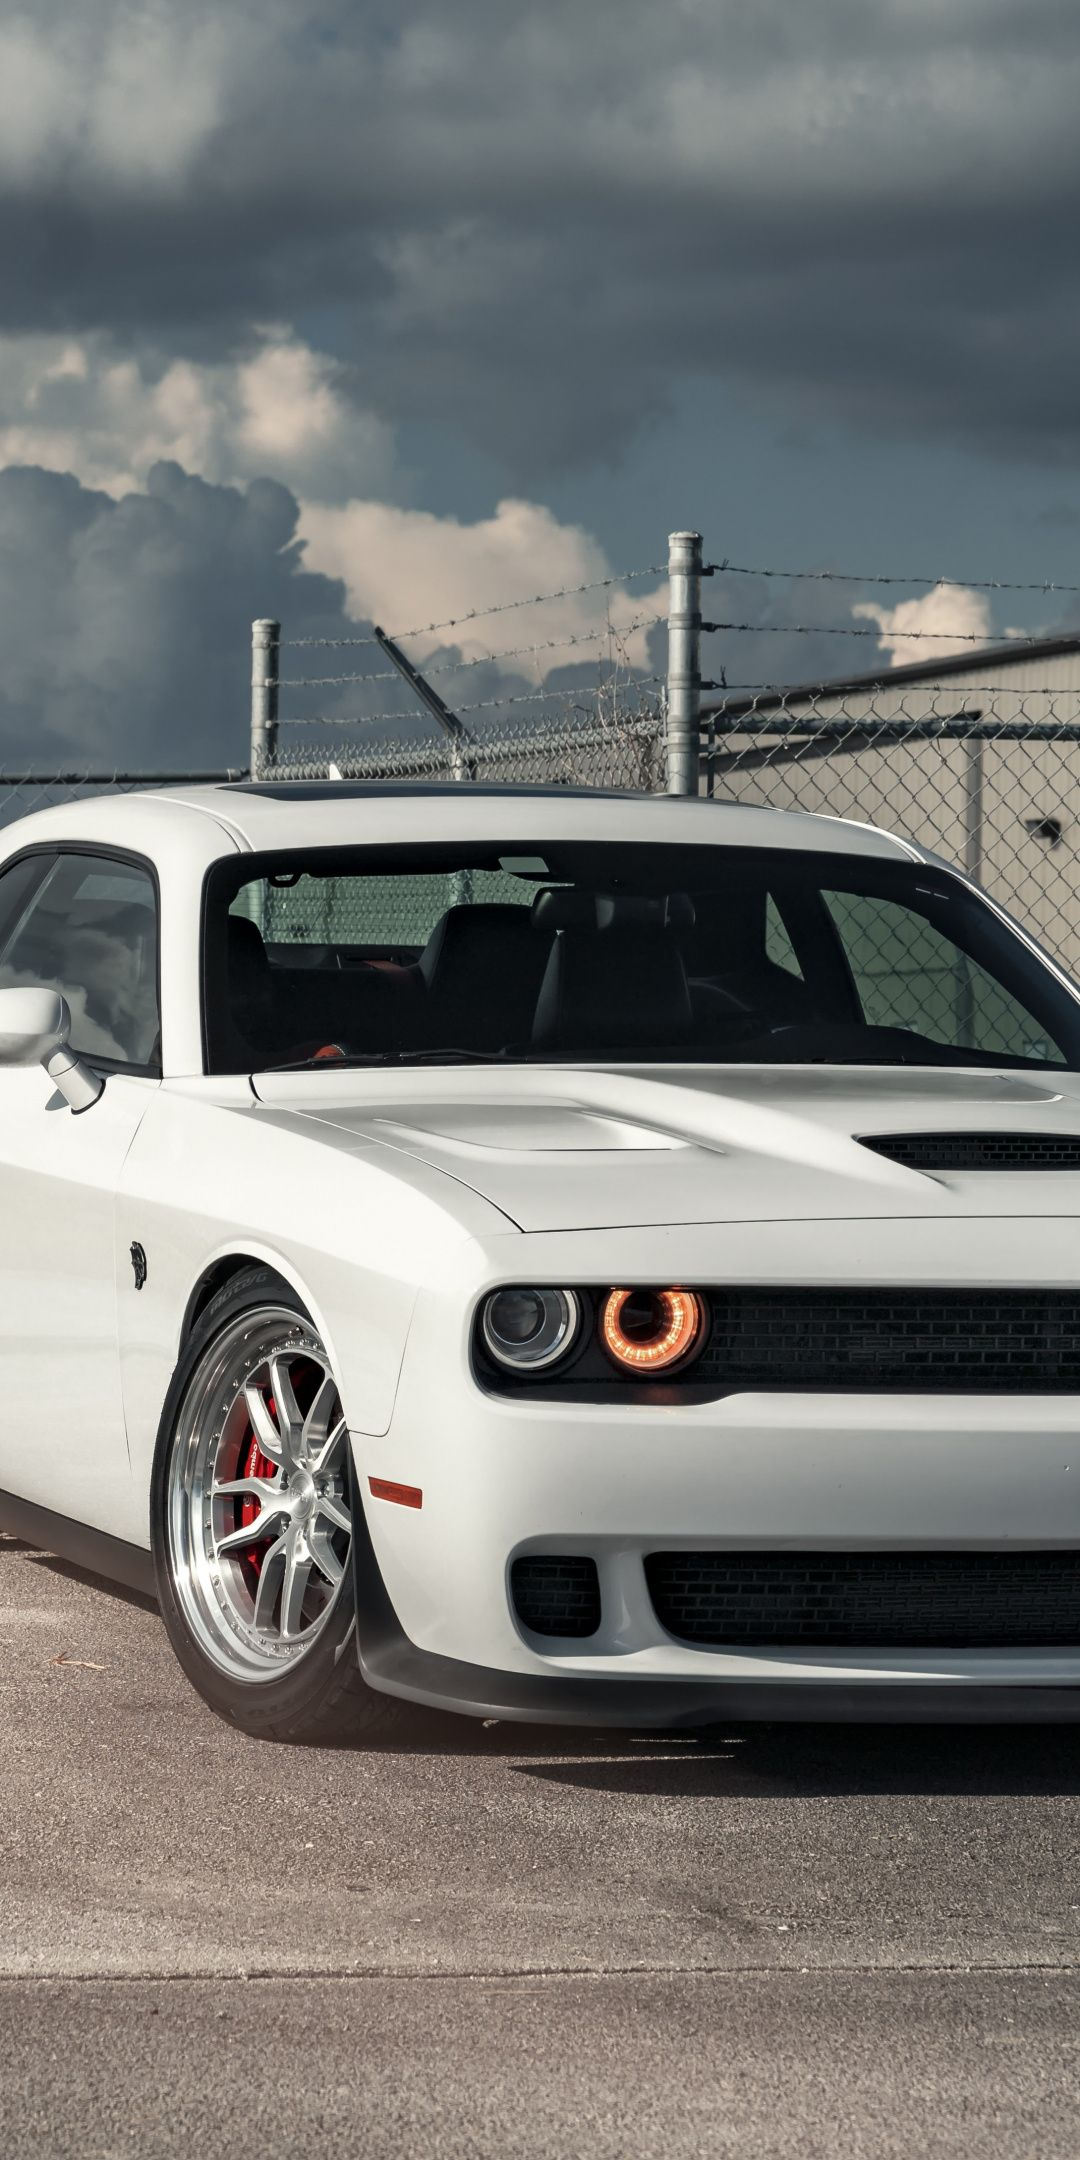 1080x2160 Dodge Charger hellcat, white muscle car, wallpaper | Dodge charger hellcat, Dodge charger, Car wallpapers